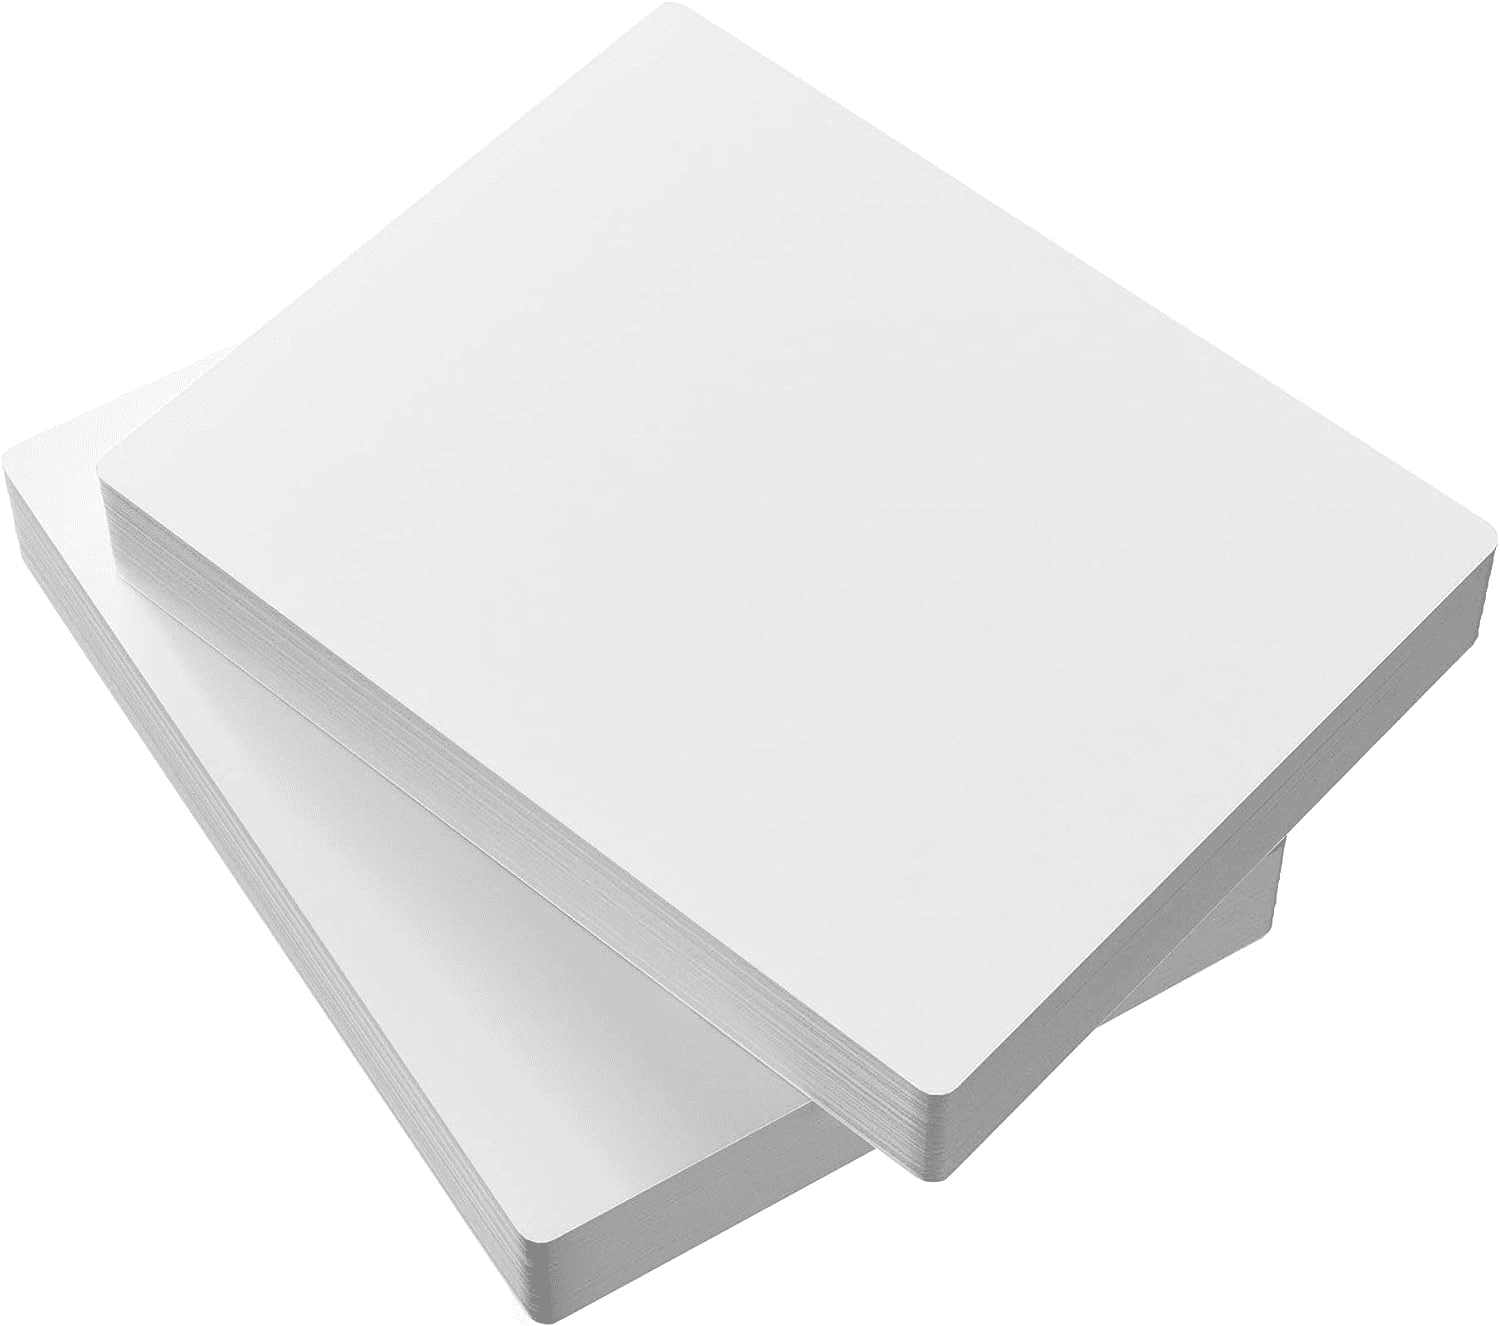 GBC Self Sealing Laminating Sheets, Single-Sided, Letter Size, 3 Mil, 50  Pack, Laminating Pouches for Letter, Legal, Cards & More